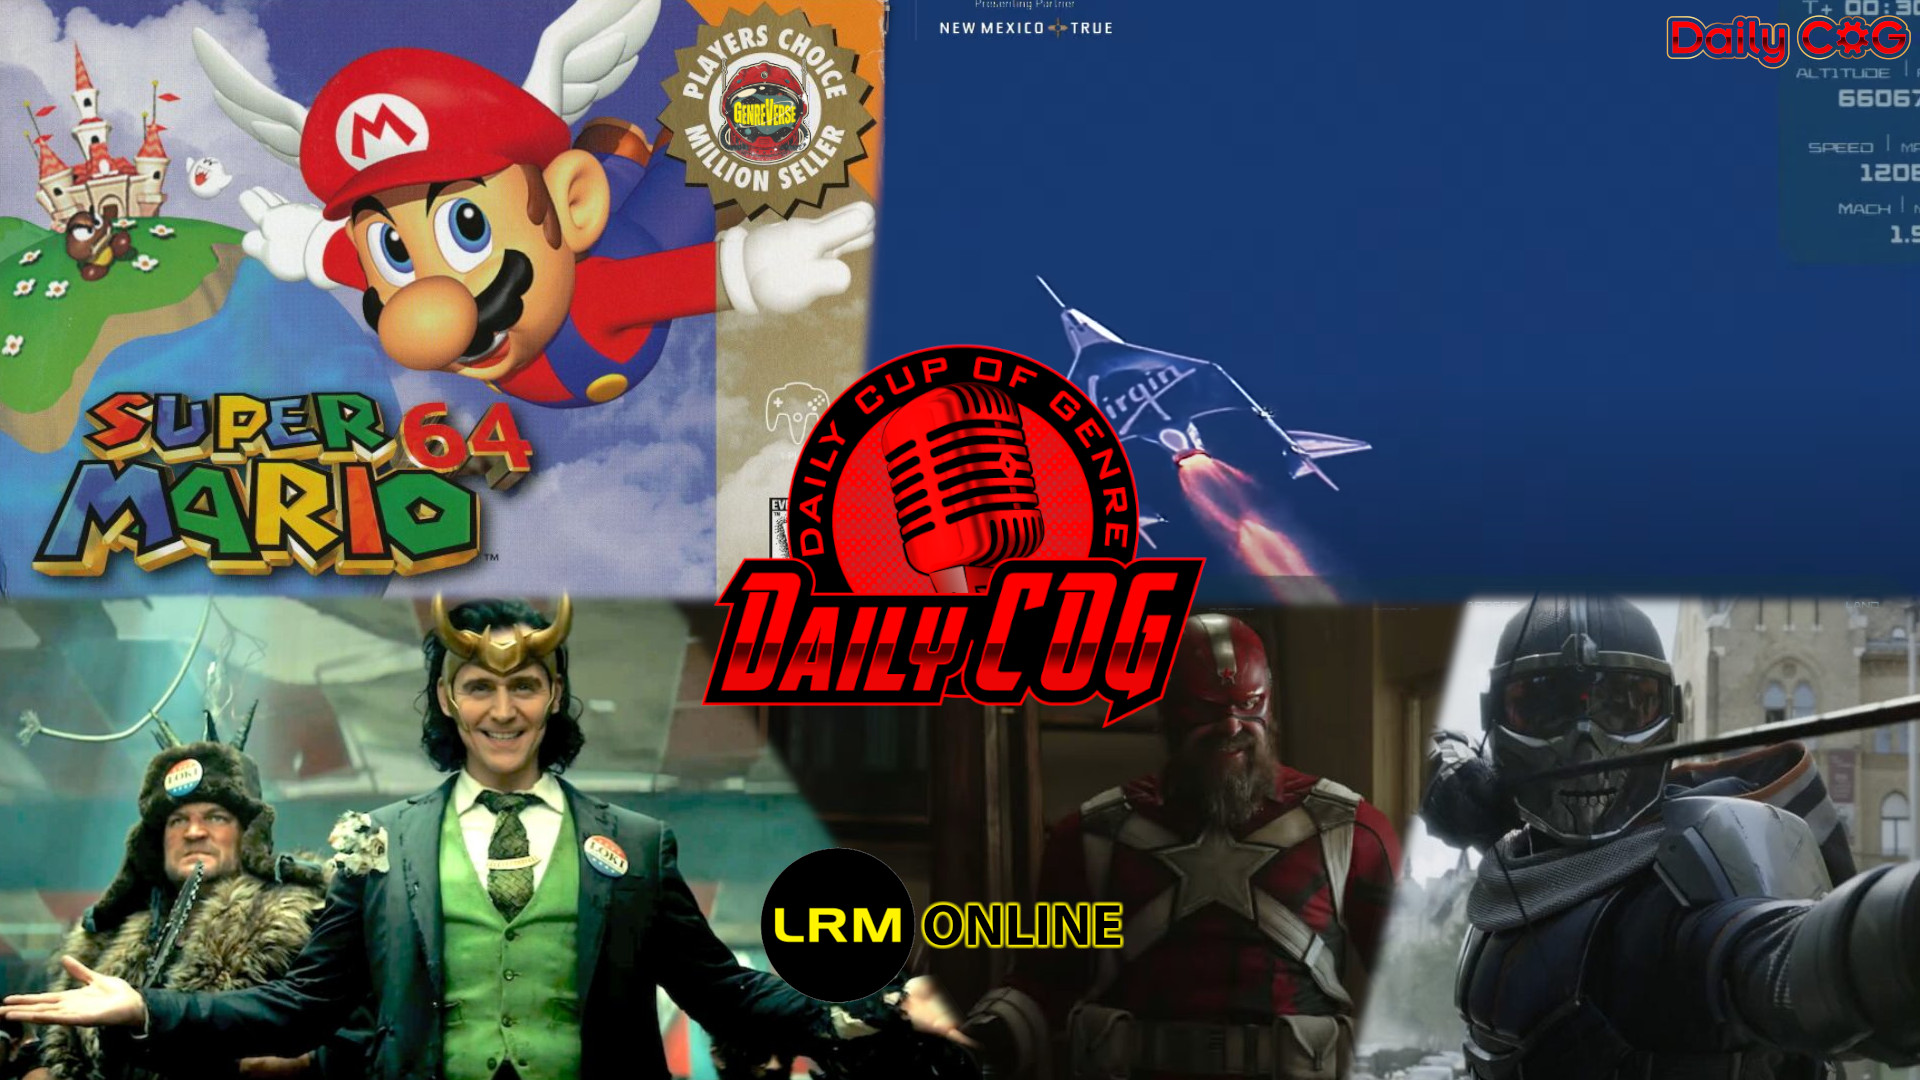 Loki Final Episode Predictions, Who’s Wrong About Black Widow, & Tech Tuesday: Mario 64 Auction & Virgin Galactic Space Flight | Daily COG